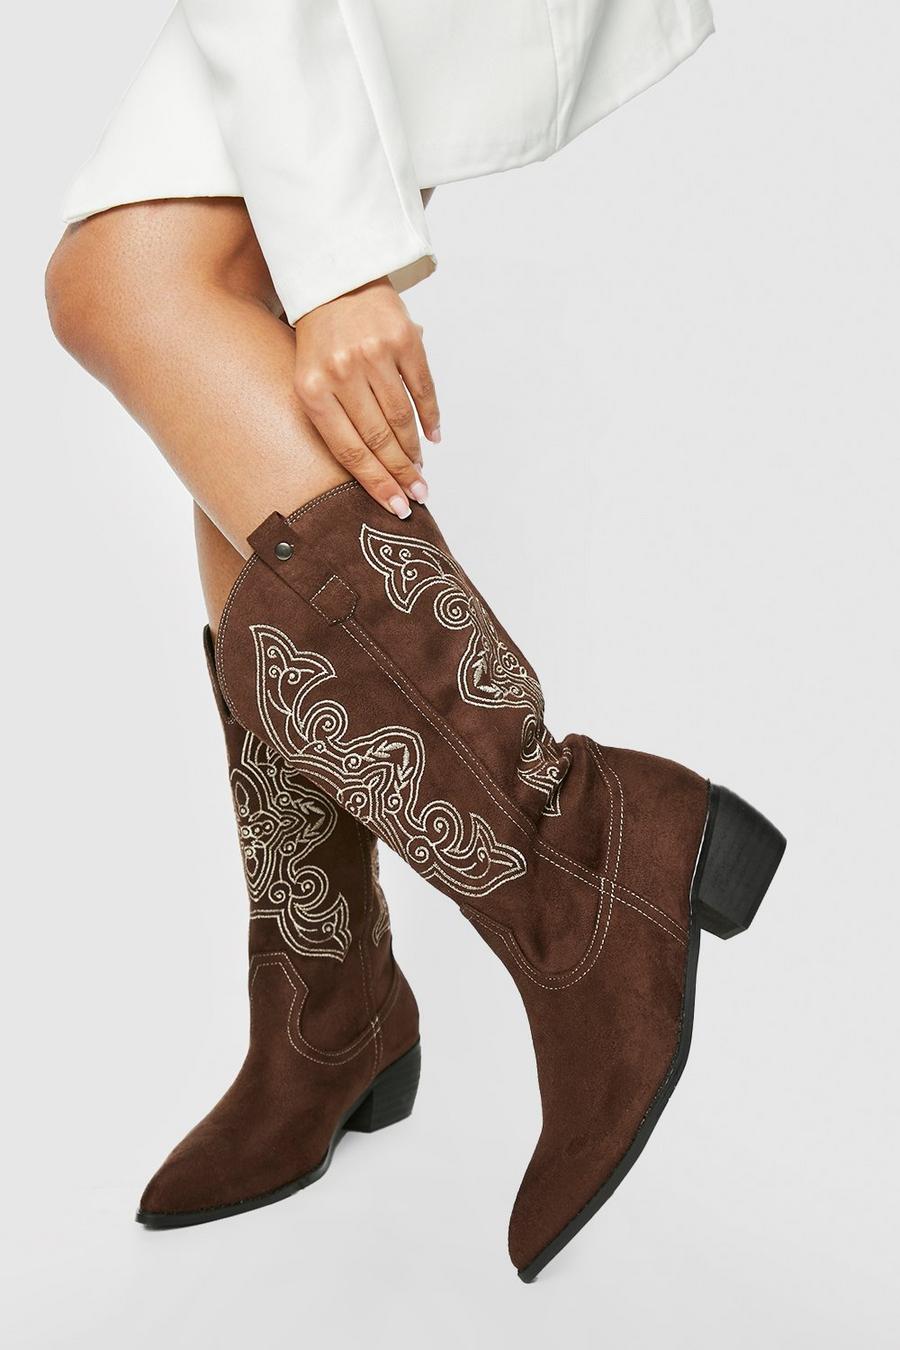 Chocolate marron Wide Fit Contrast Embroidered Casual Cowboy Western Boots